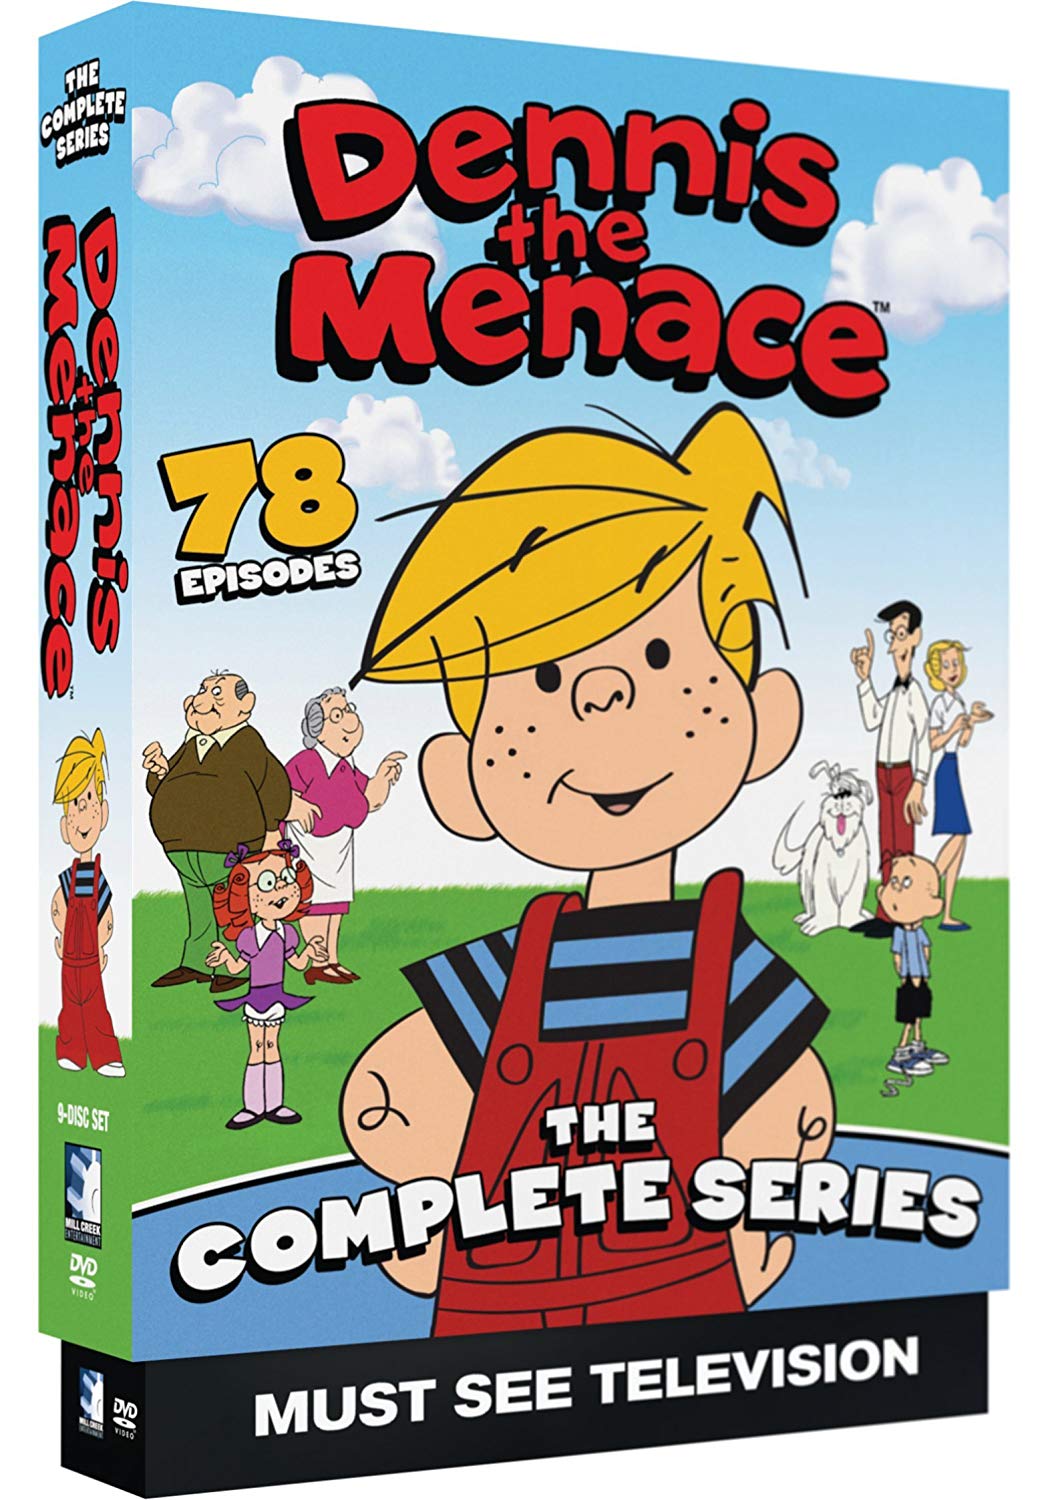 17 Animated Complete Series DVD Boxsets Currently Less Than $20 On Amazon